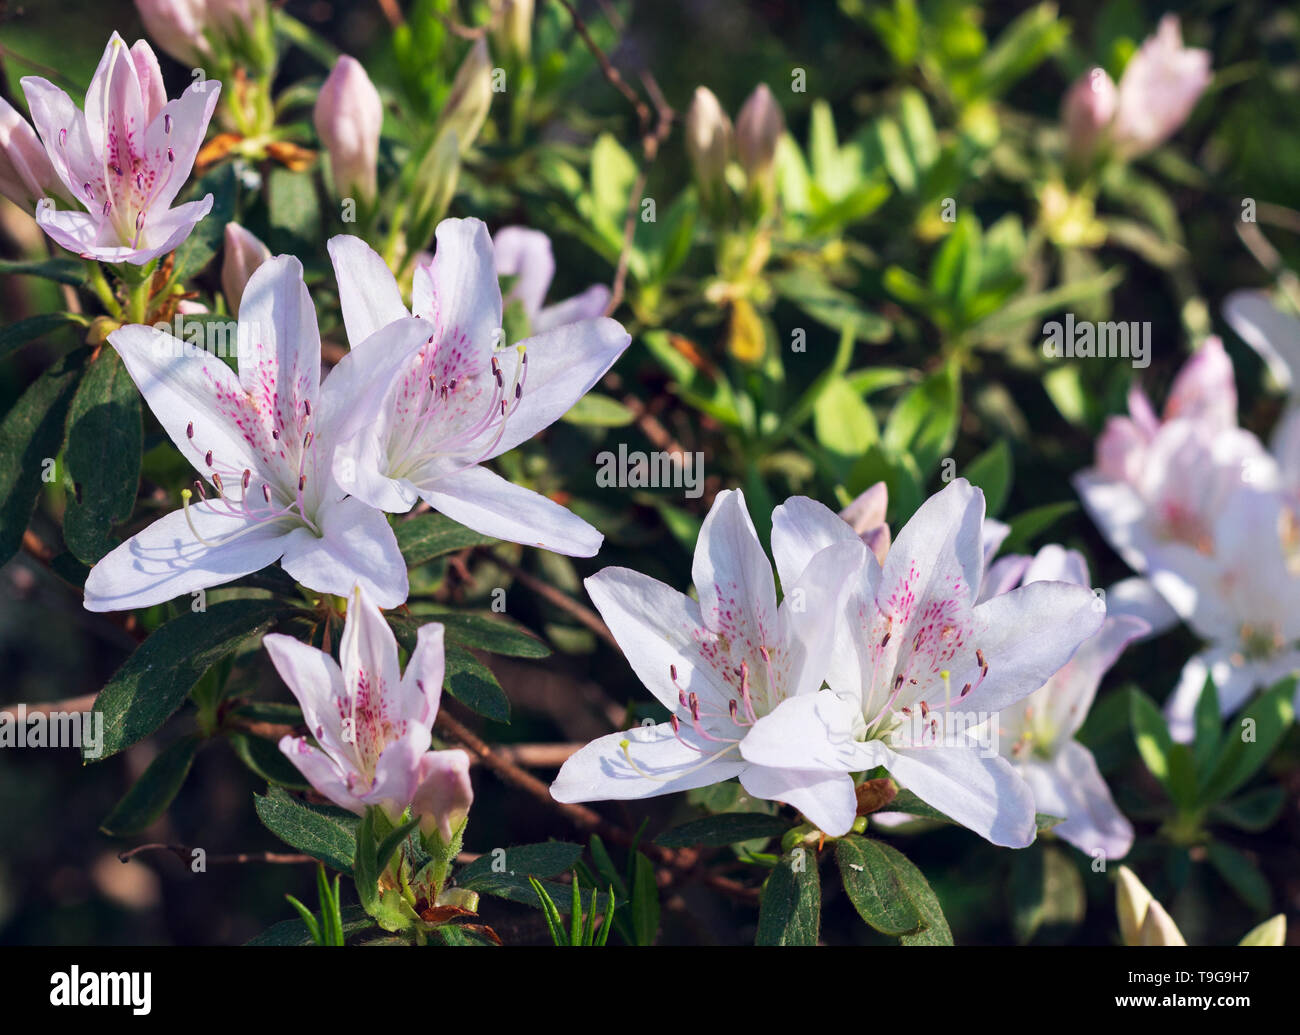 These white azaleas (Rhododendron pentanthera) are tinged a pink blush when in full bloom. Stock Photo